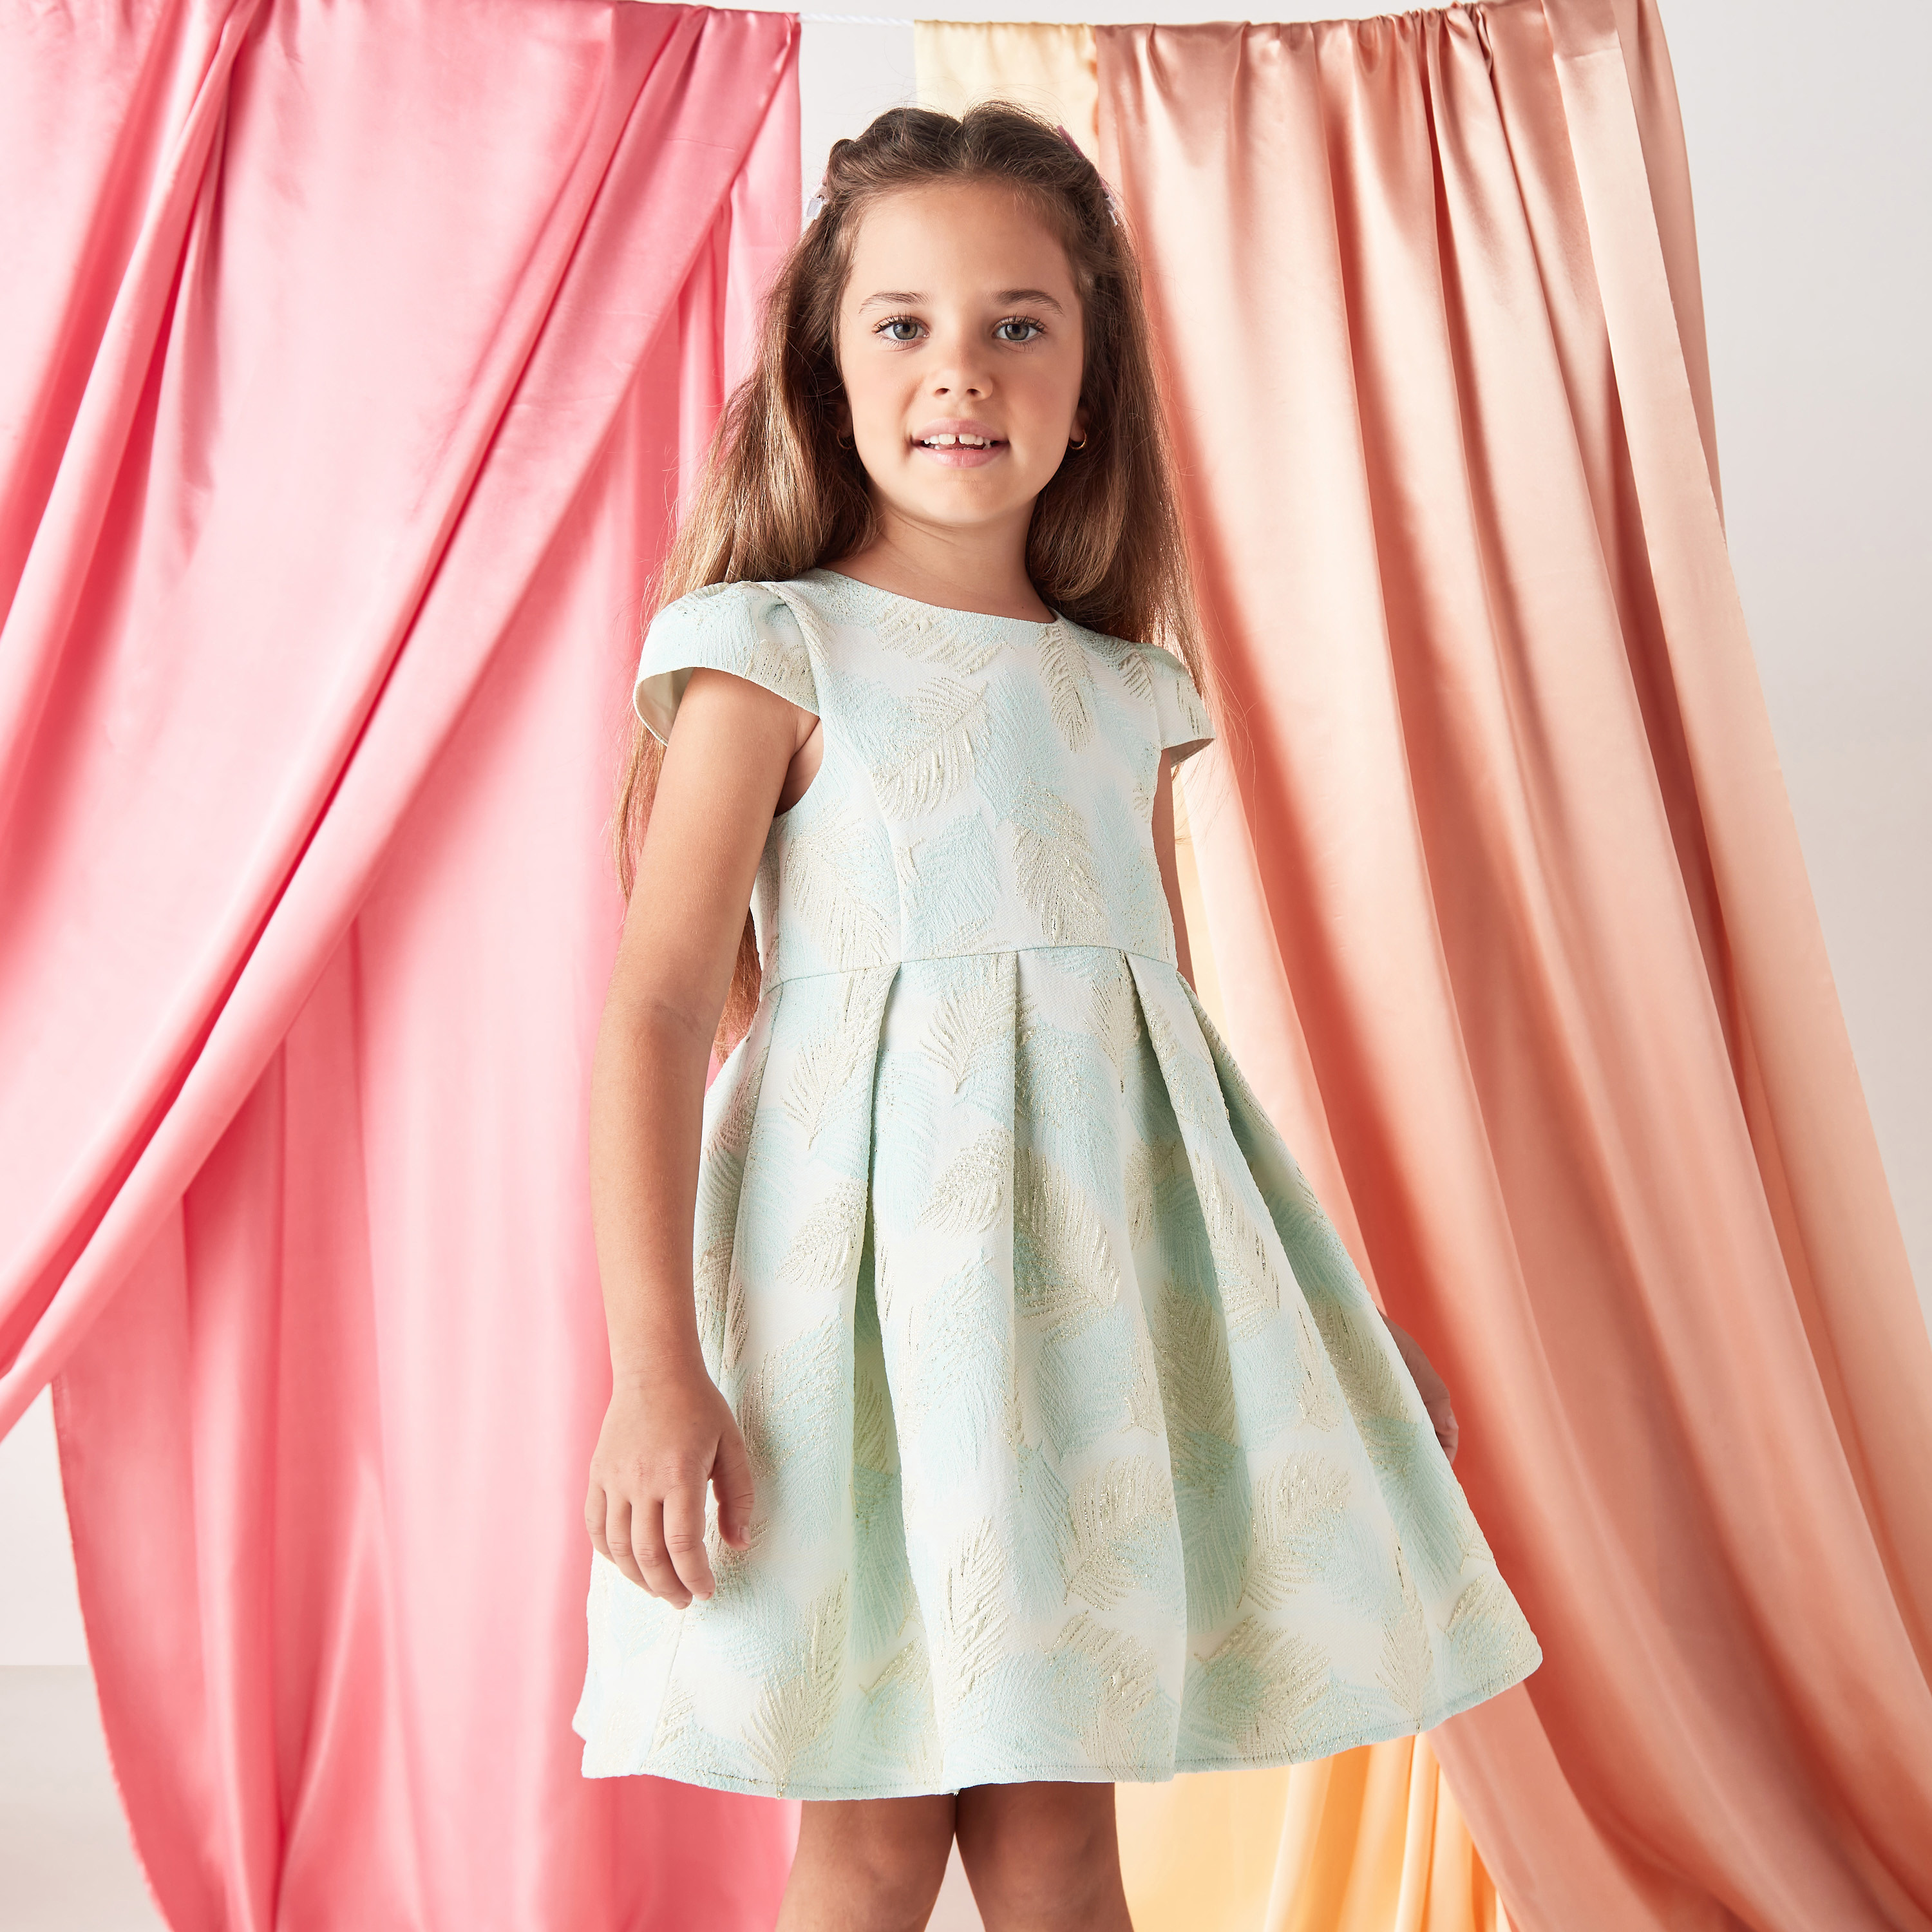 Kids Clothes | Kids Fashion & Outfits Online | New Look